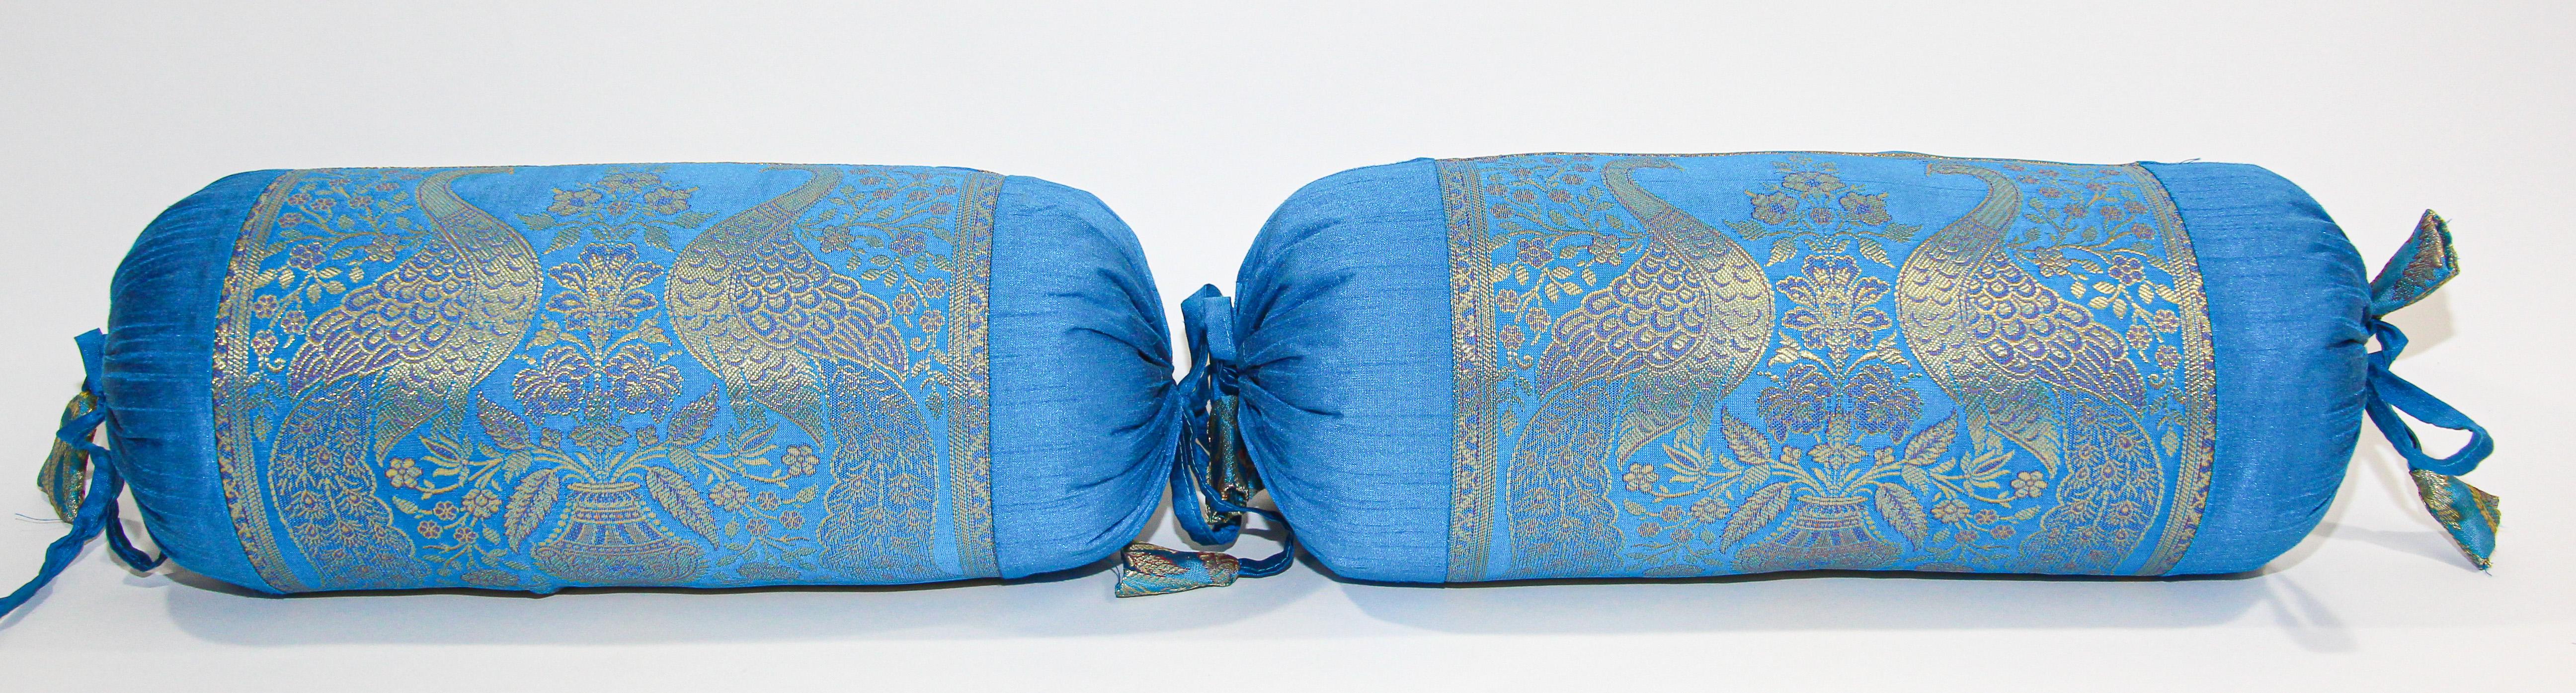 Vintage Brocade silk bolster pillows made from silk sari fabric in turquoise blue and gold colors.
Set of two Indian Mughal style pillows with majestic peacock design in front of each neck brocade silk bolster lumbar pillow.
Size: 15 inches long x 6